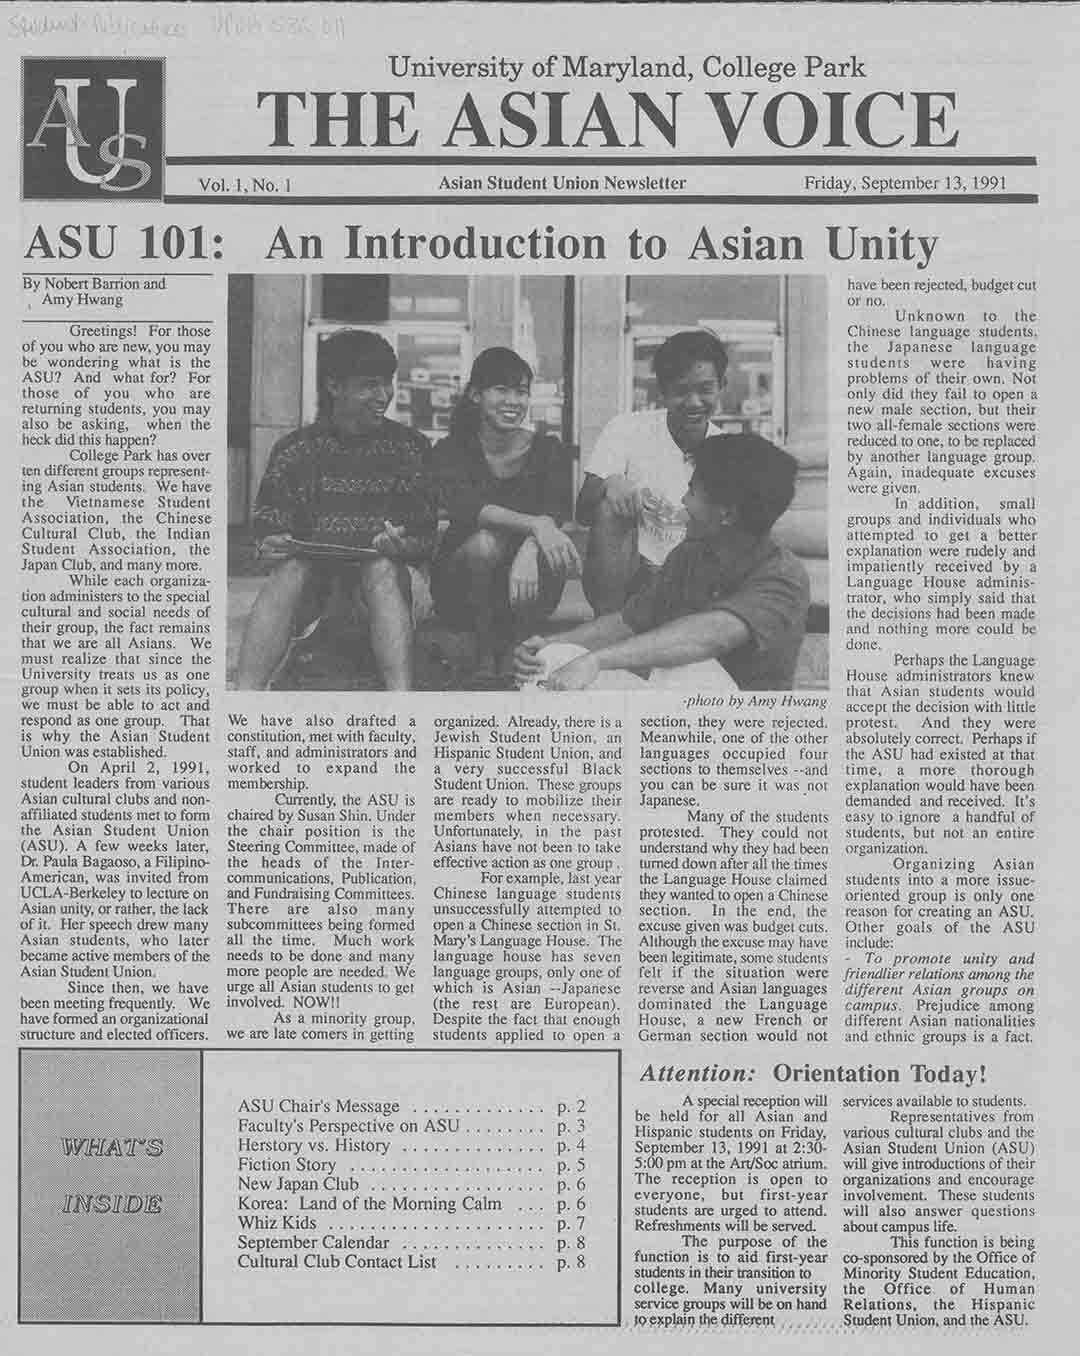 The Asian Voice newspaper